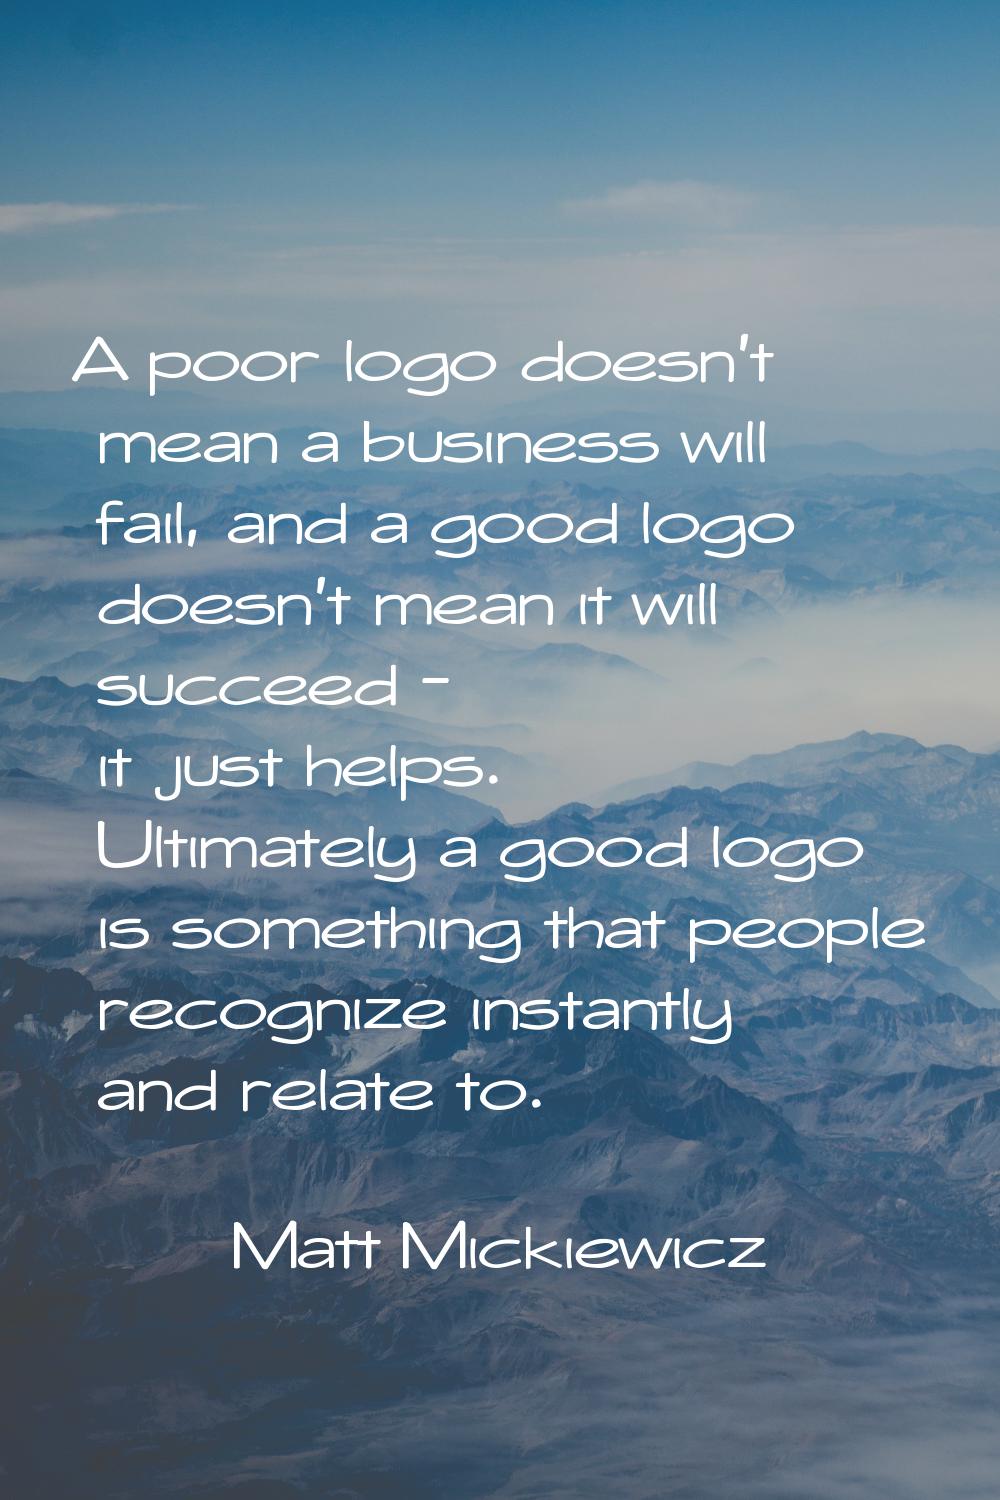 A poor logo doesn't mean a business will fail, and a good logo doesn't mean it will succeed - it ju